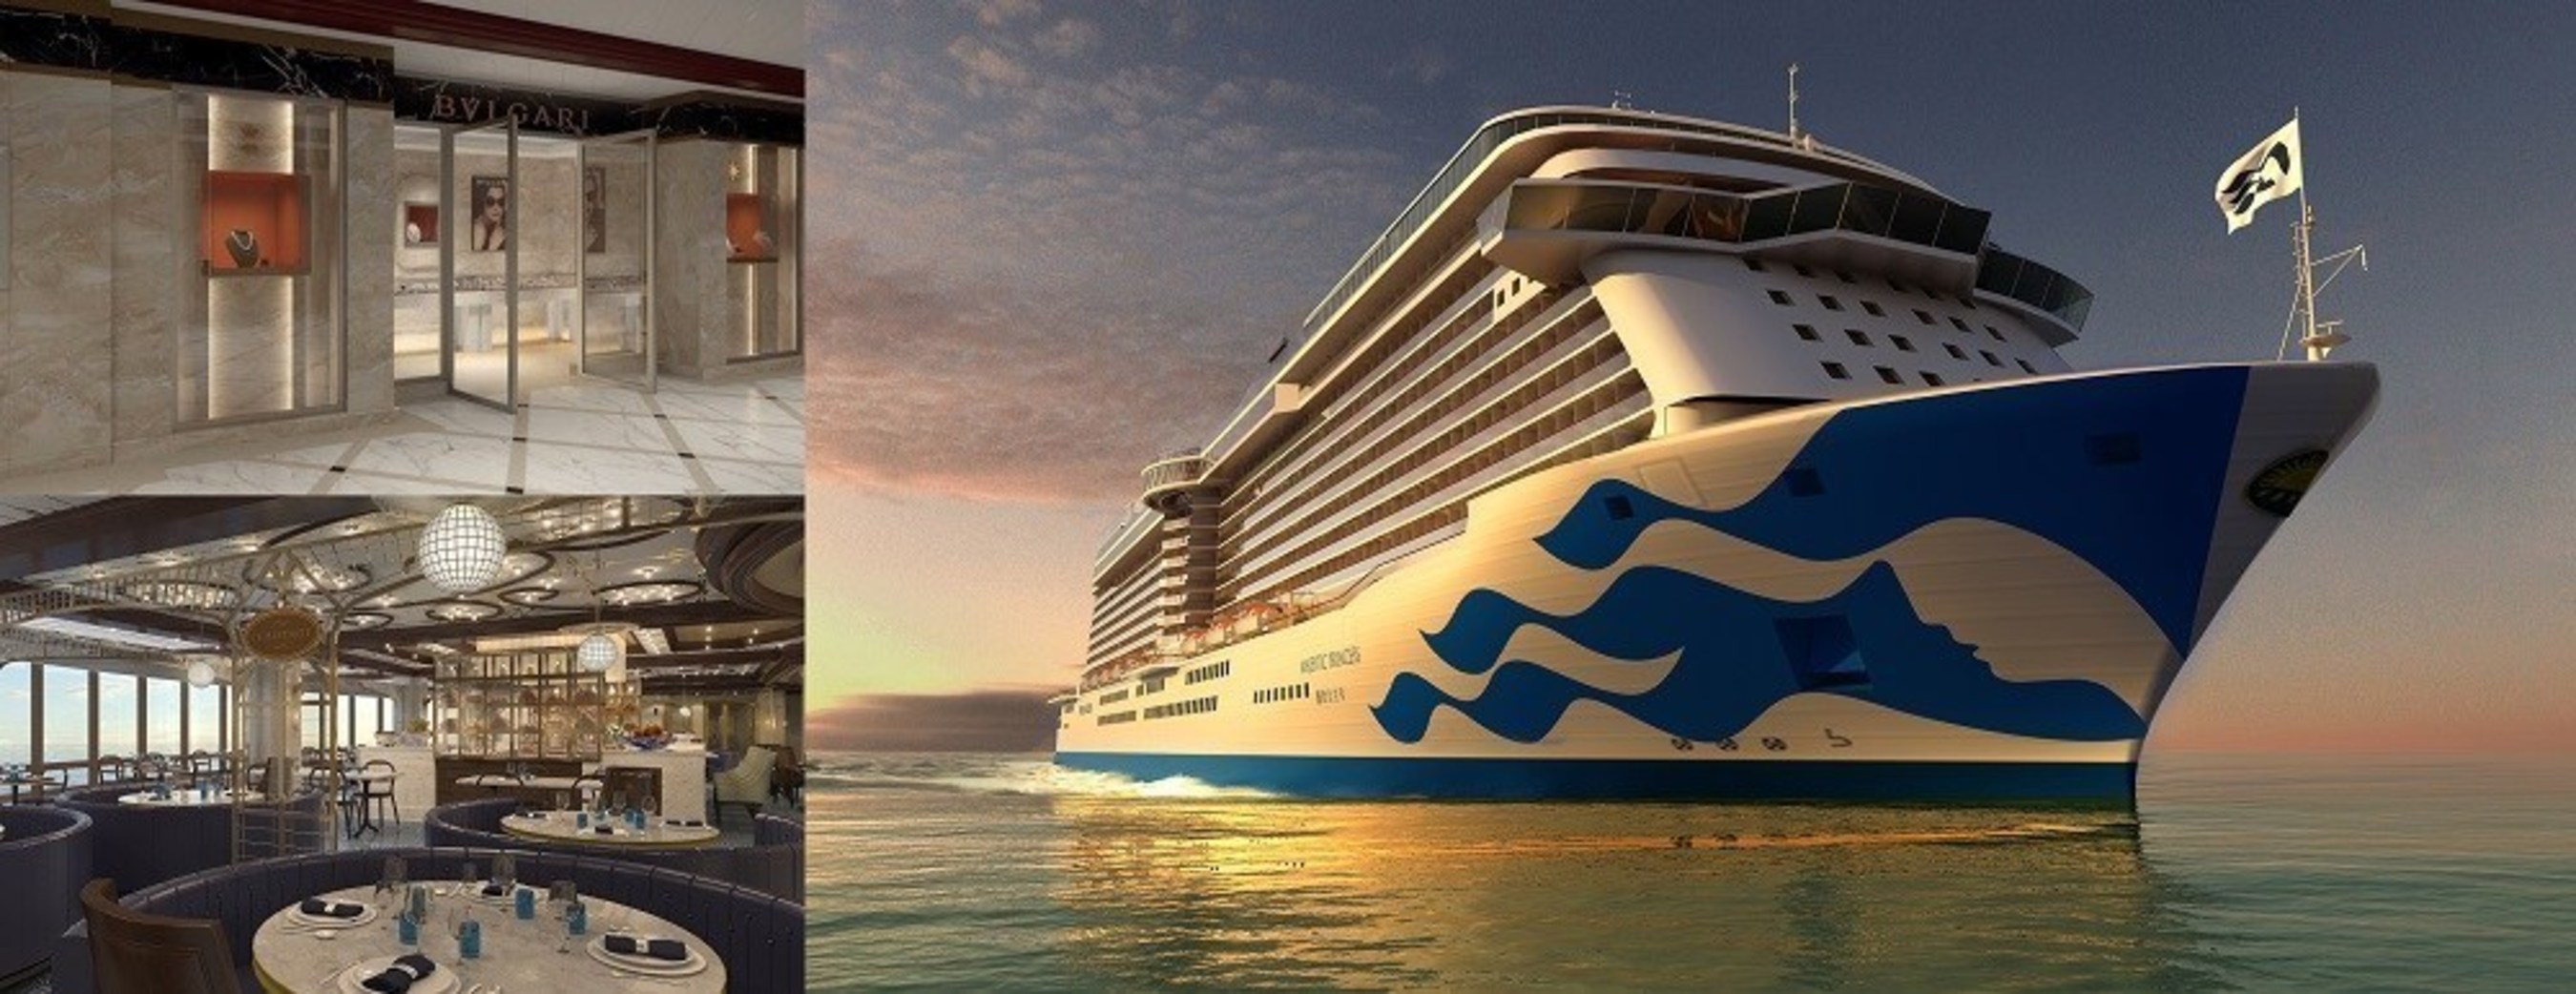 Princess Cruises unveils design and key features for newest ship, Majestic Princess (pictured from top to bottom, The Shops of Princess and  Le Bistrot Restaurant)